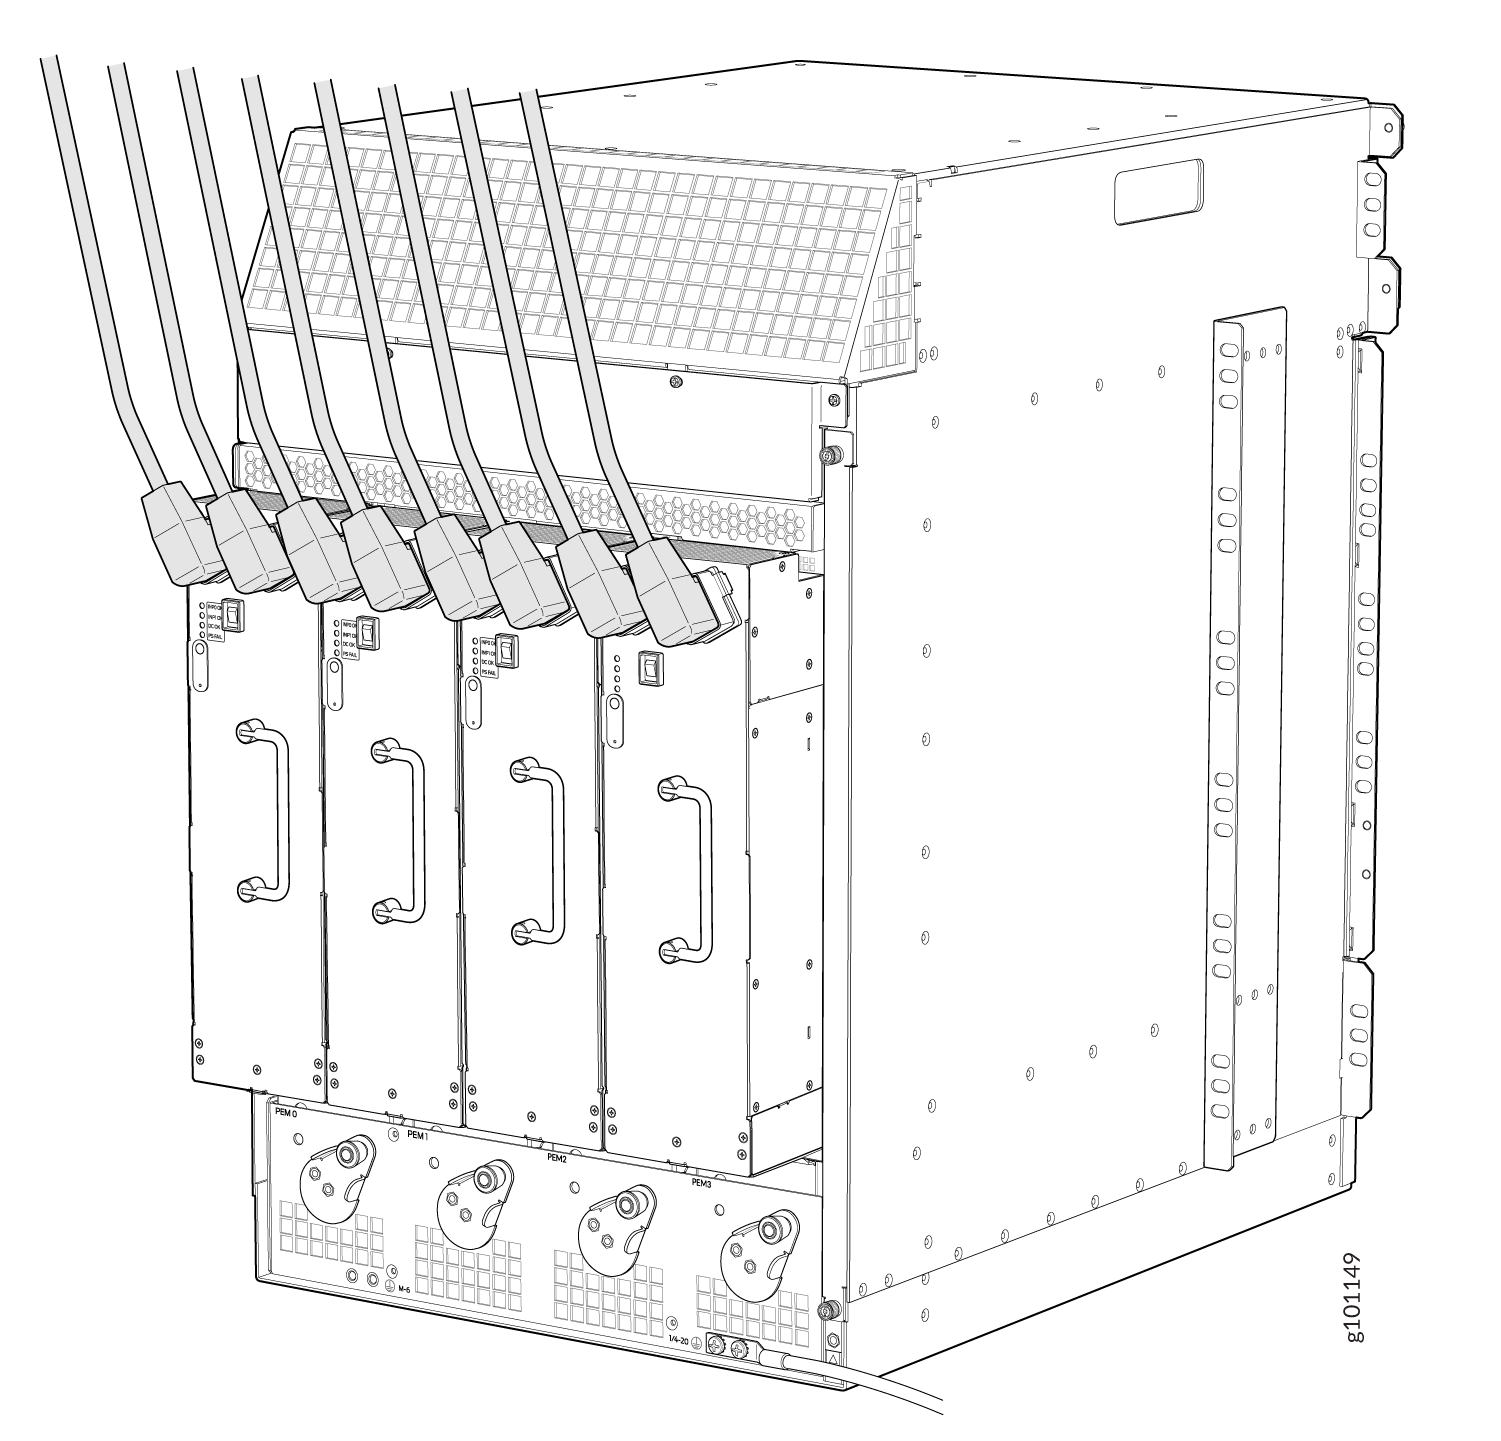 MX960 with Both High-Capacity Second-Generation AC Power Feeds Connected